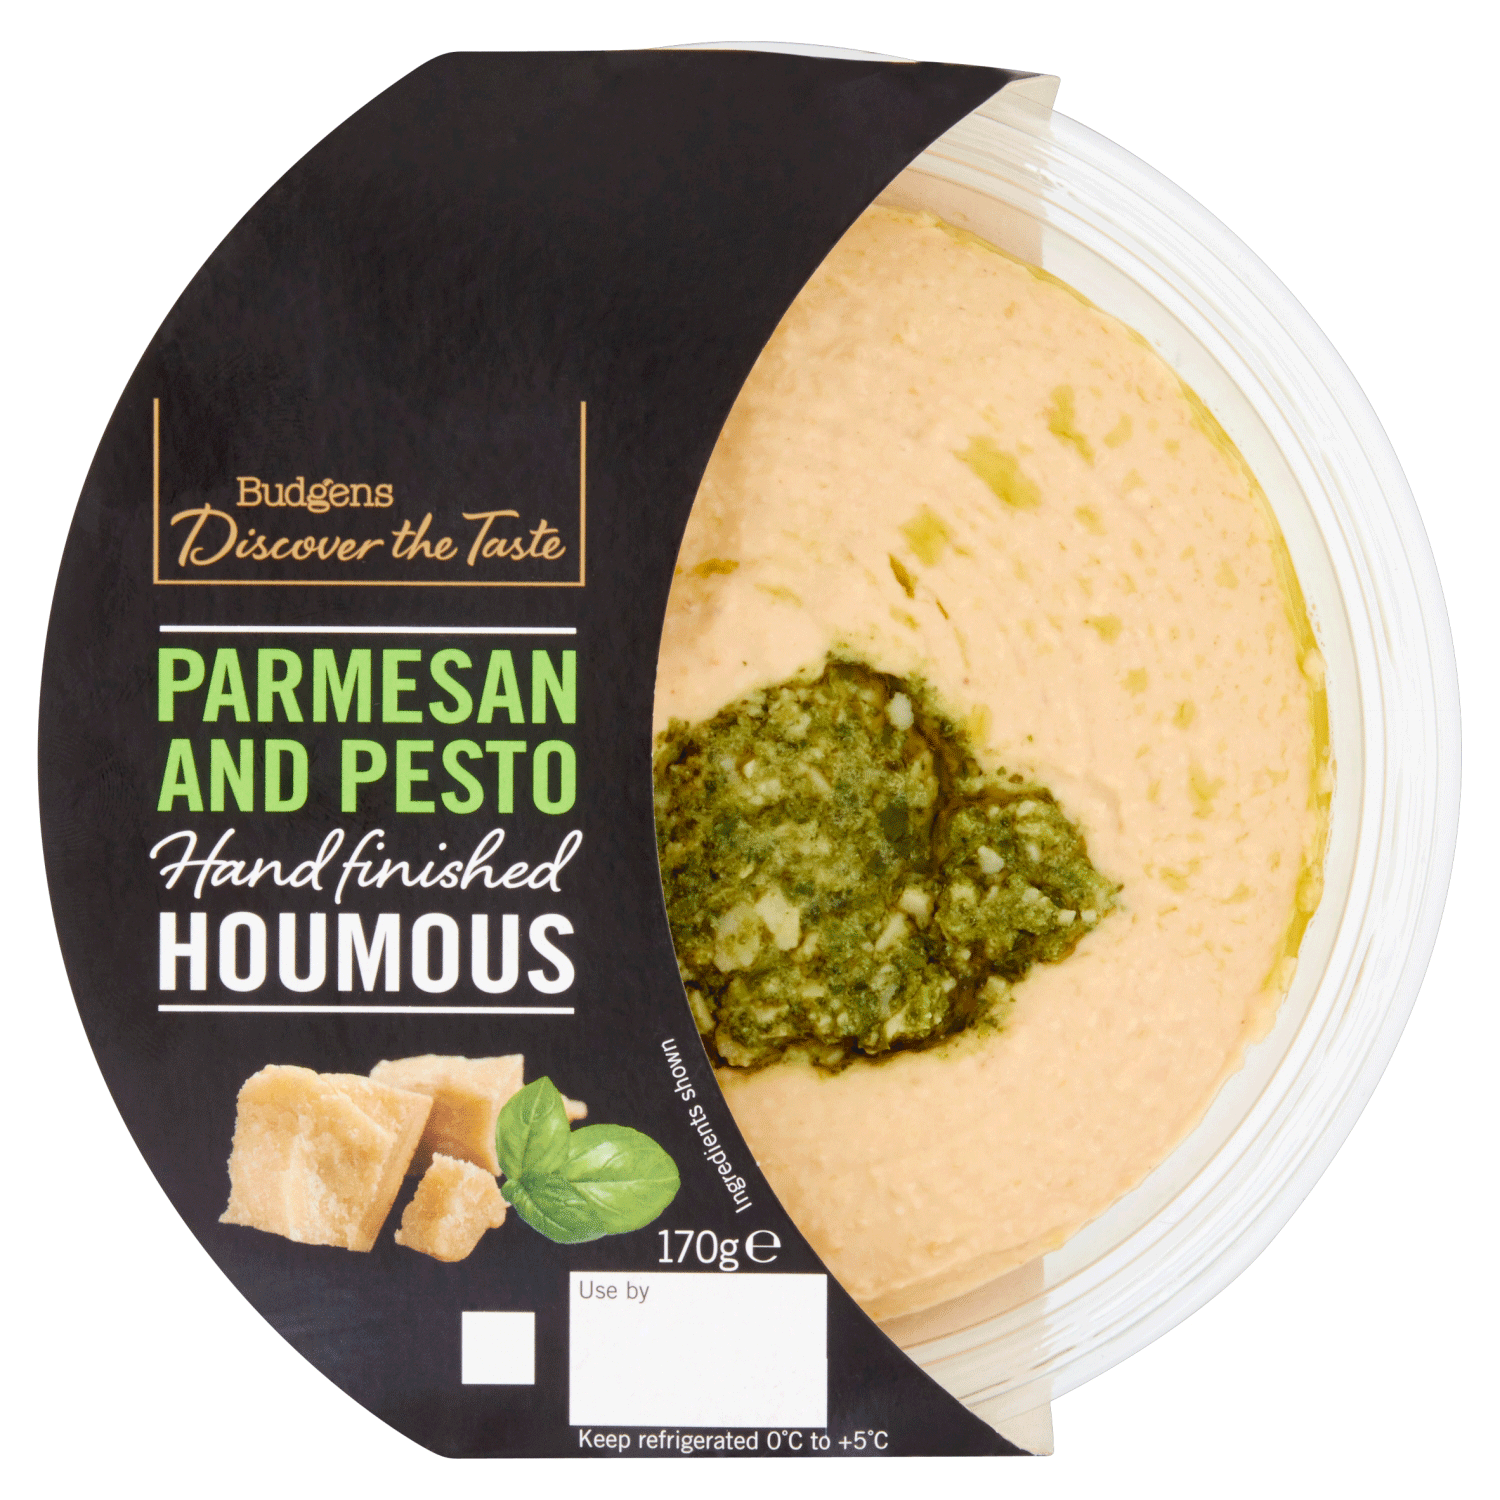 Budgens' Discover The Taste Houmous with Parmesan and Pesto